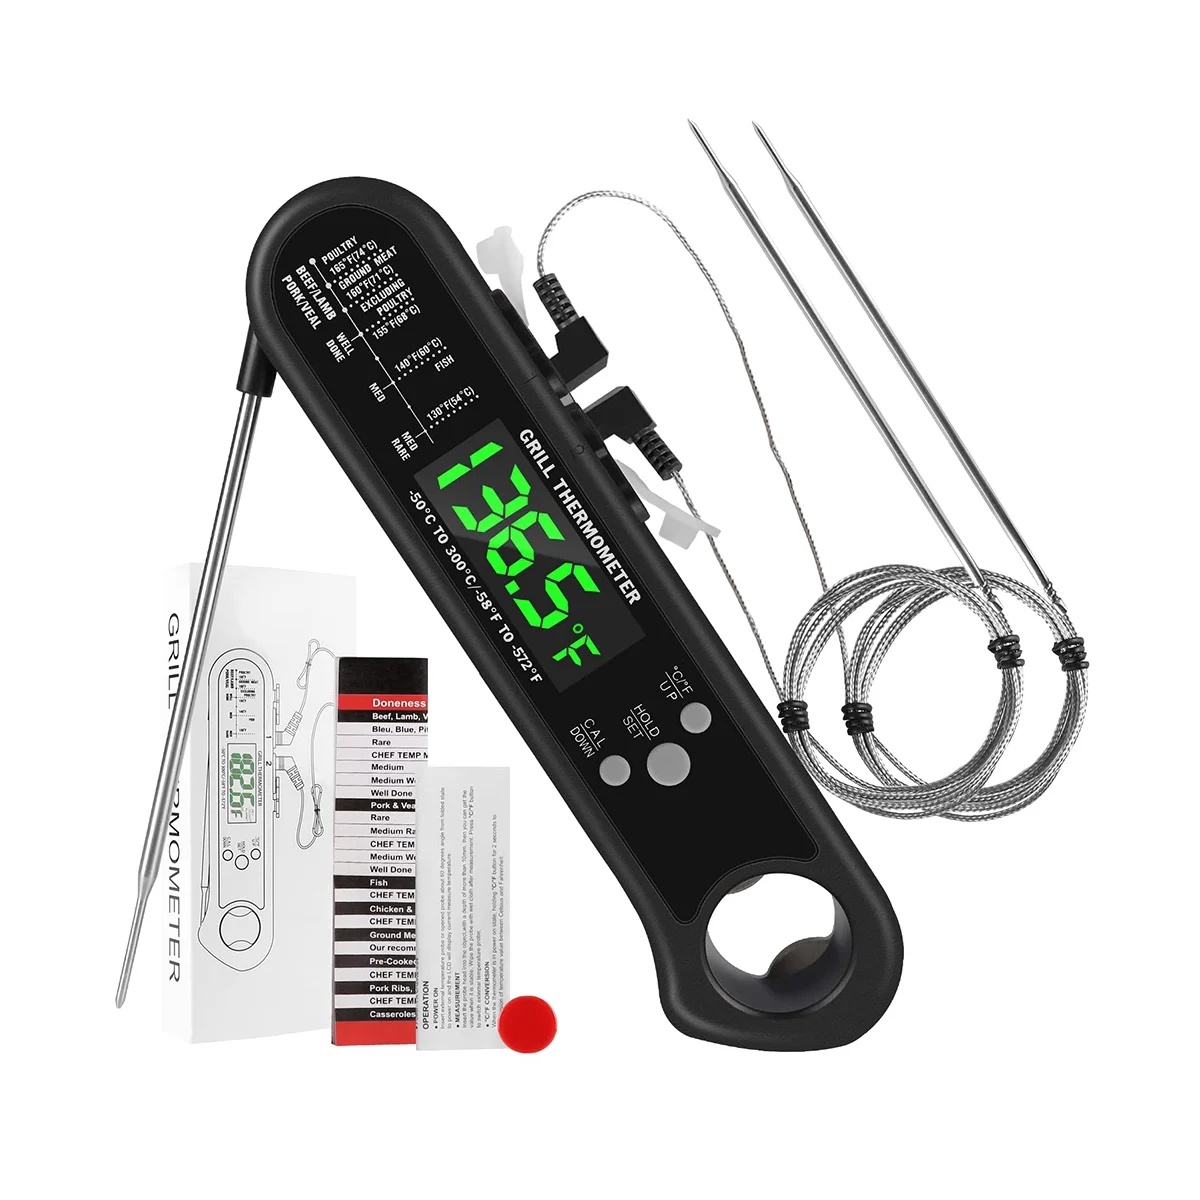 

3 in 1 Digital Meat Thermometer, Instant Read Food Thermometer with 2 Detachable Wired Probe,Calibration, Alarm Function